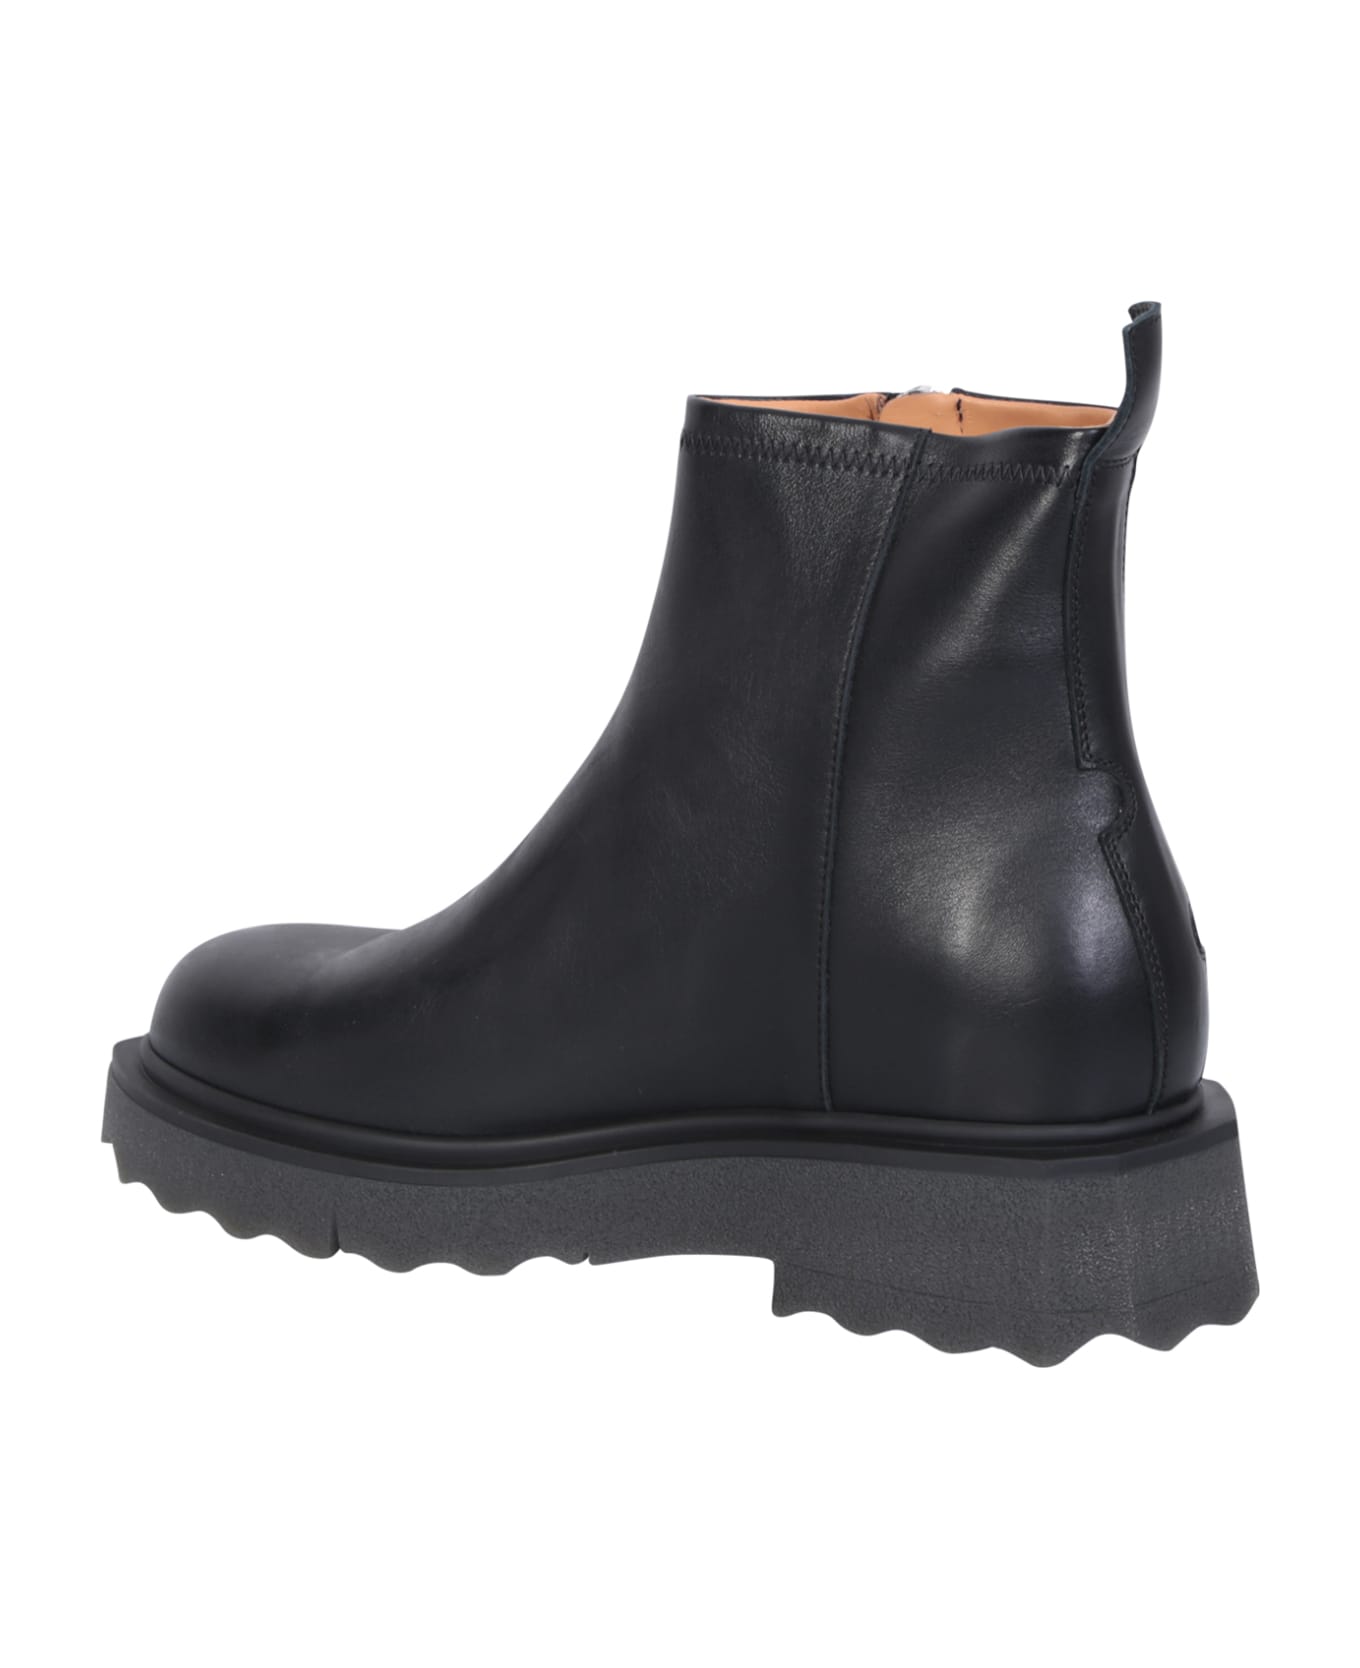 Off-White Leather Boots - Black